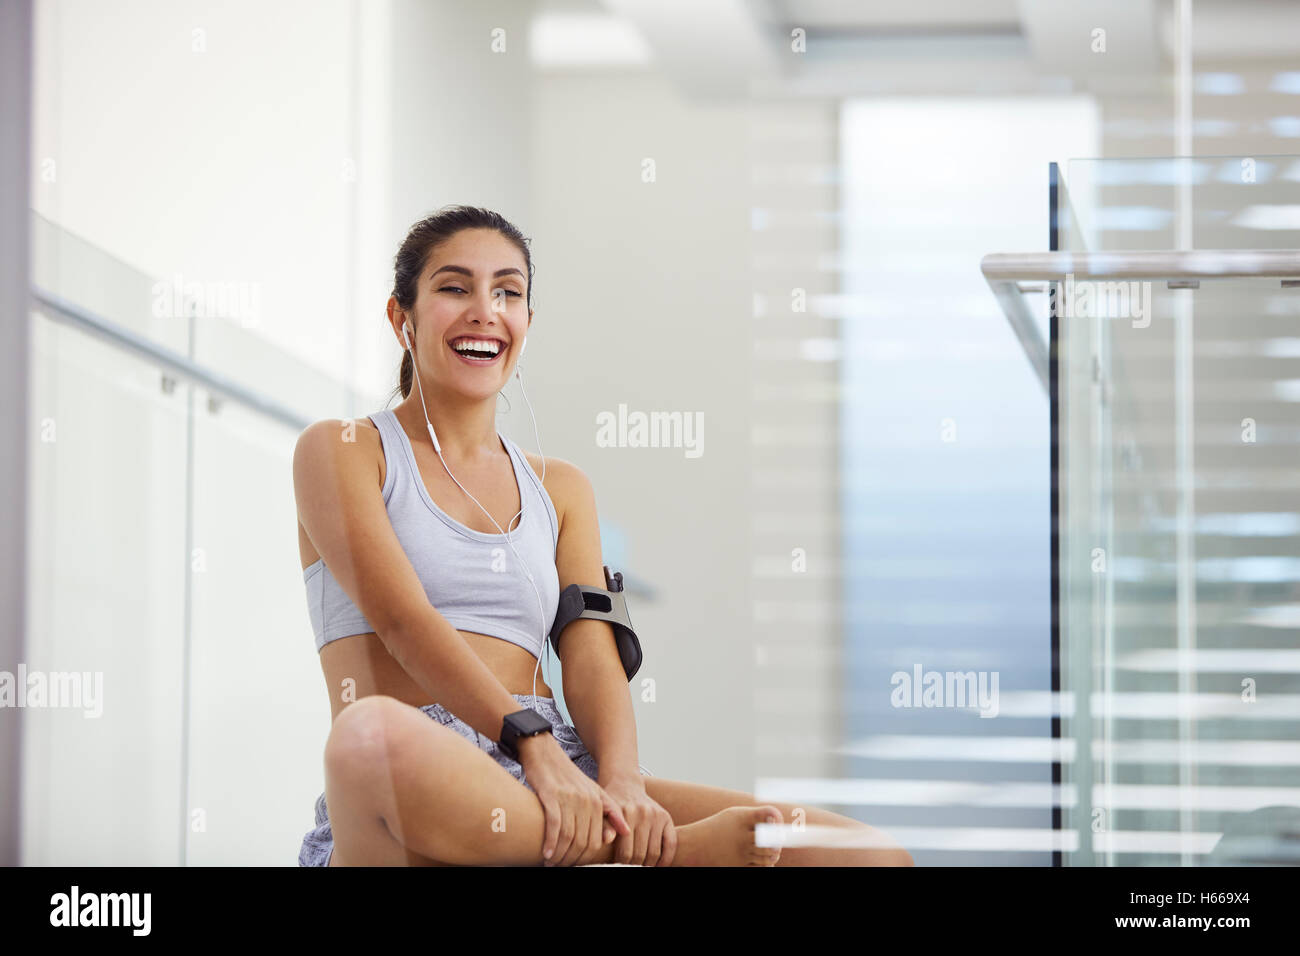 Portrait laughing woman listening to music with headphones post workout Stock Photo